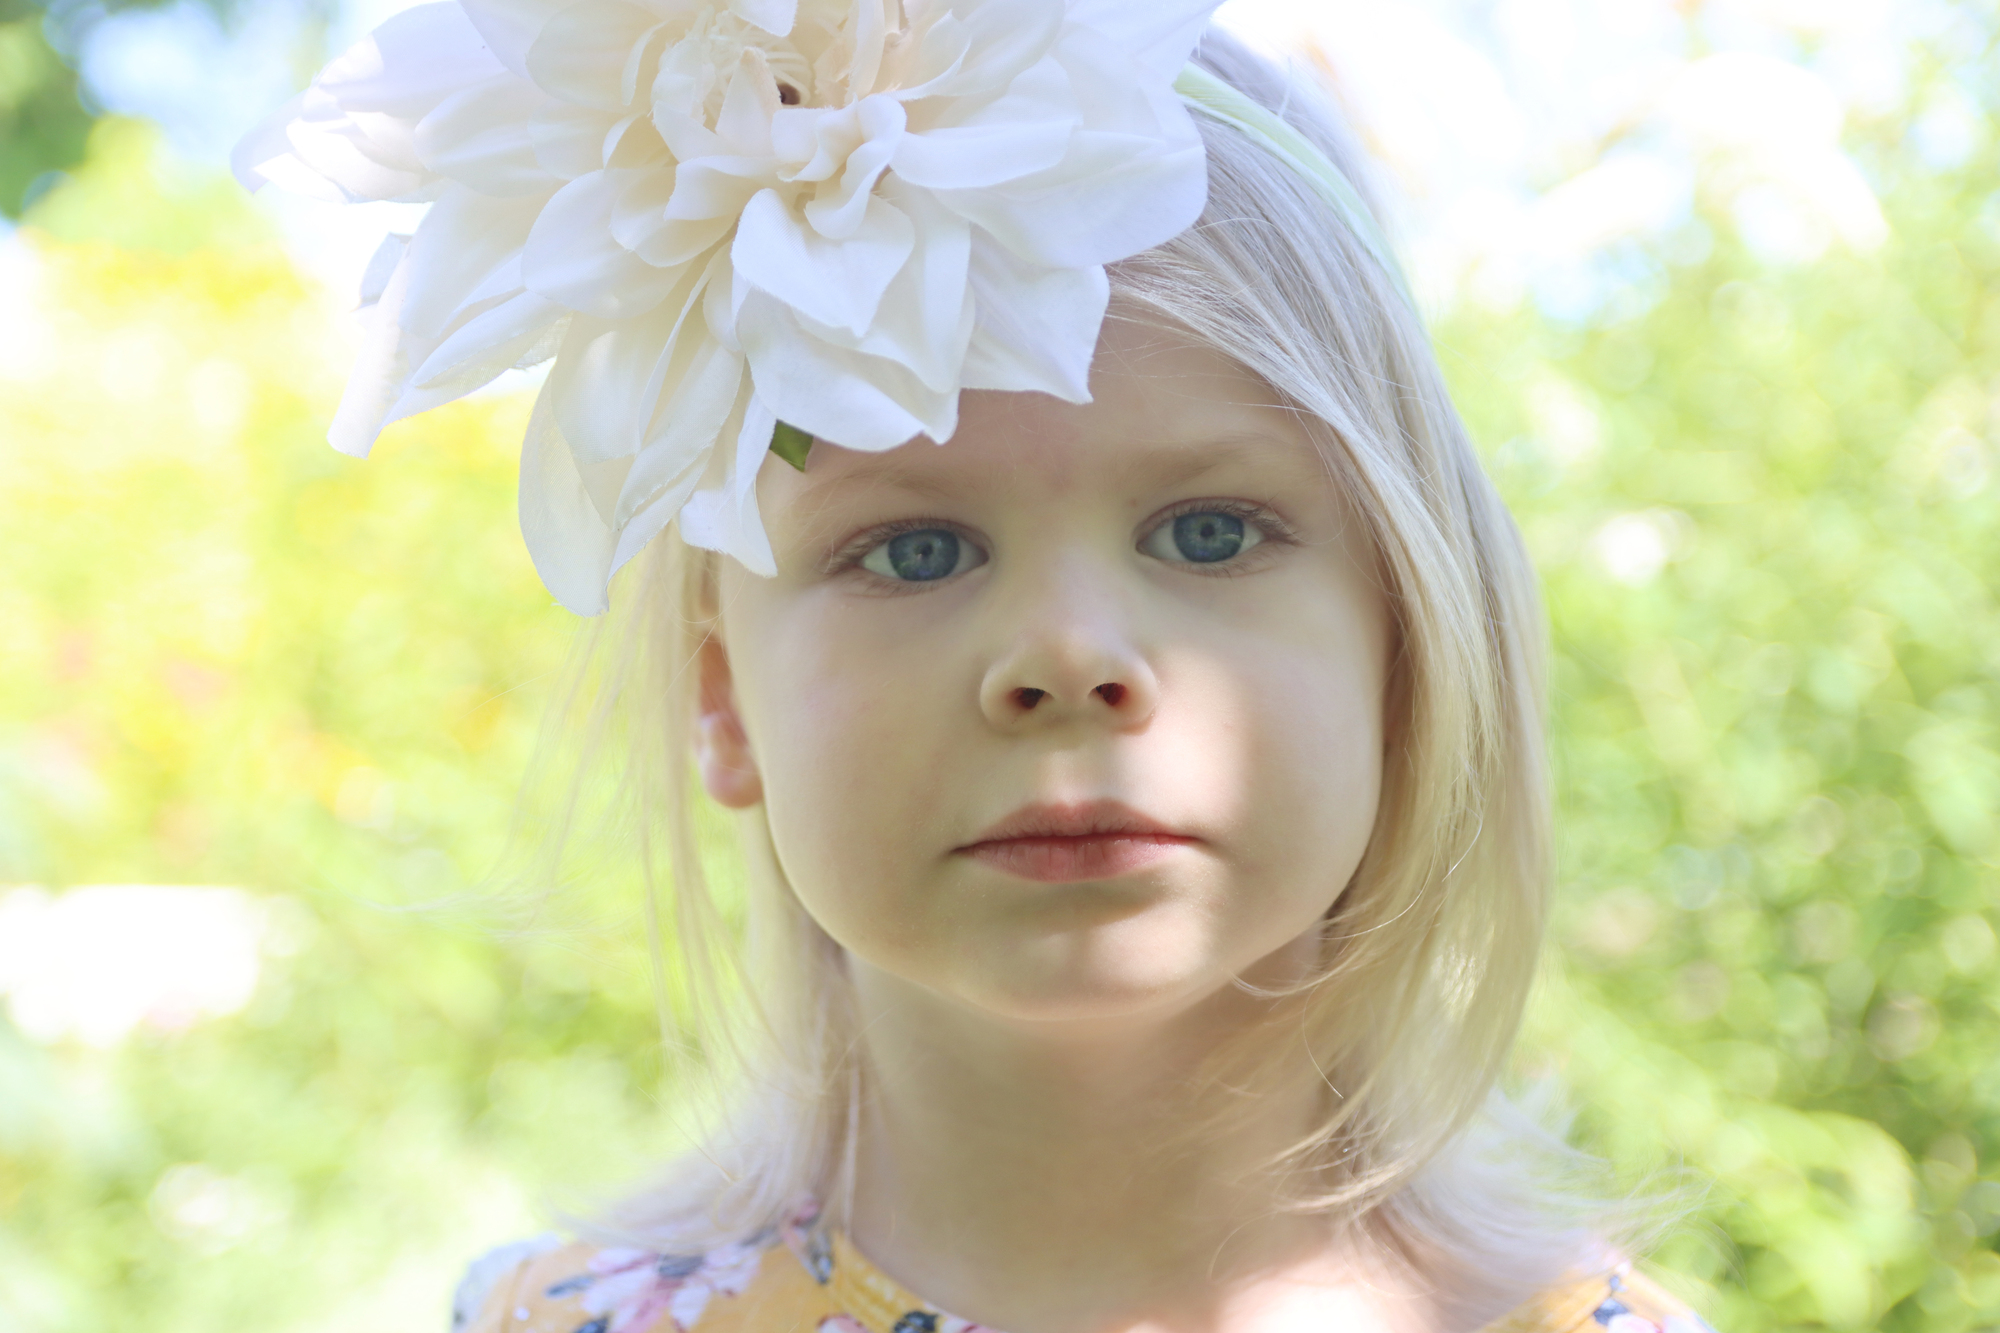 yound girl with blonde hair and large cream colored flower in her hair